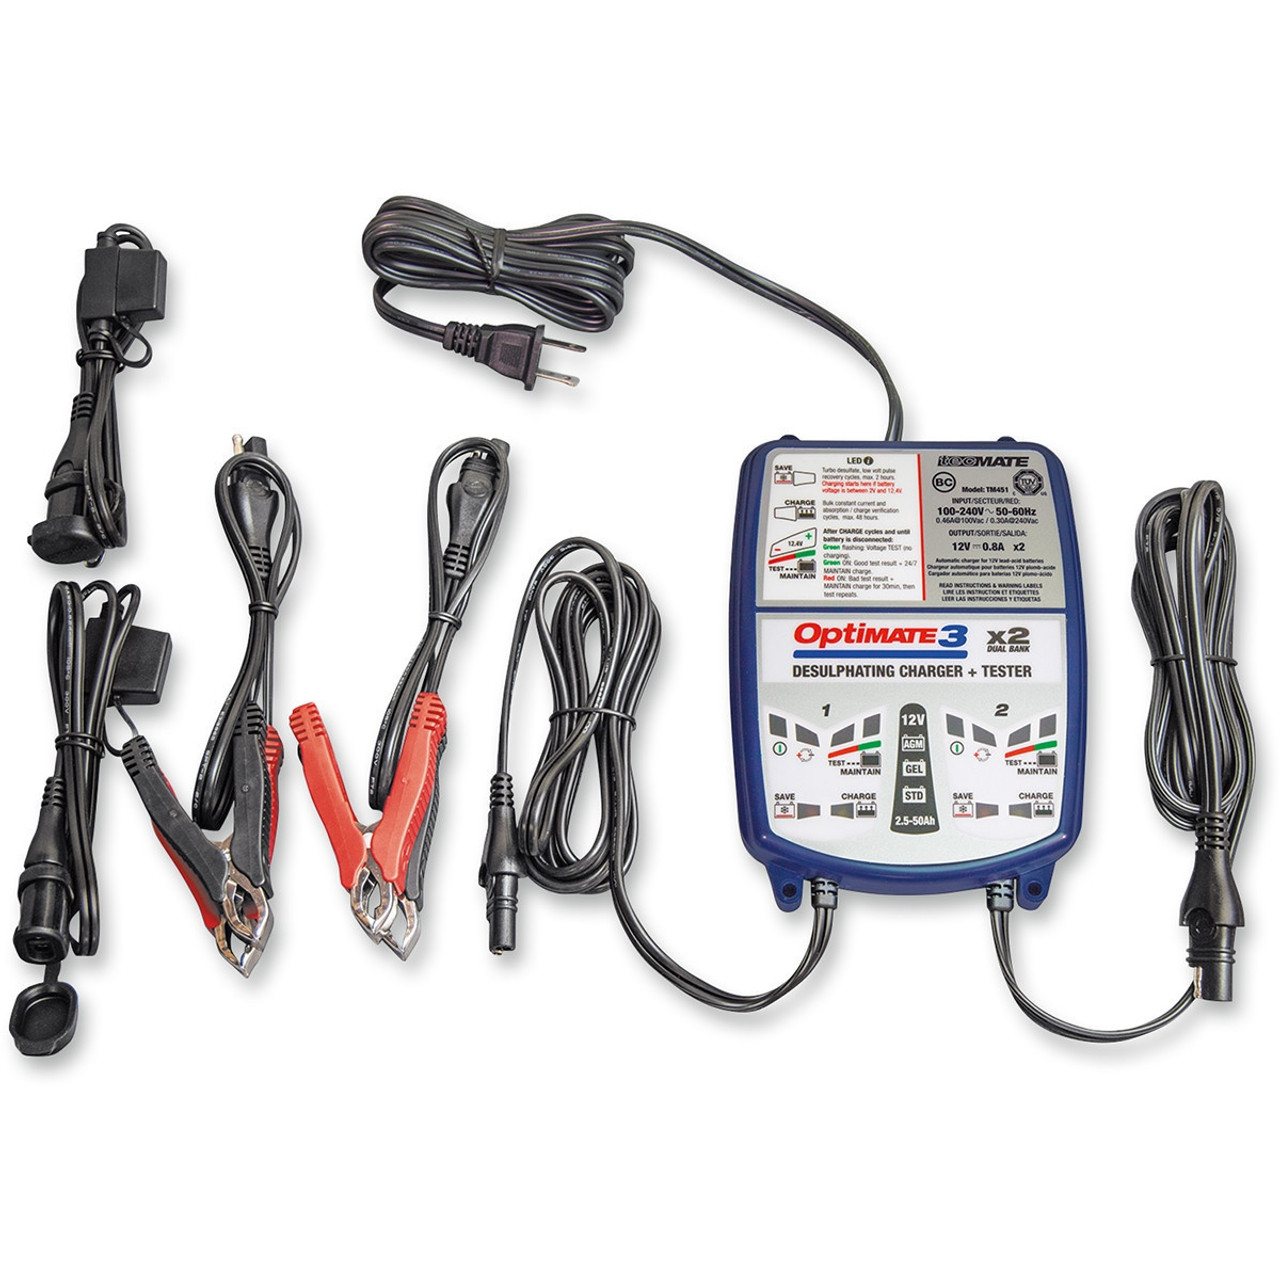 Polaris Ranger TecMate Optimate 3 X2 Battery Charger by Optimate